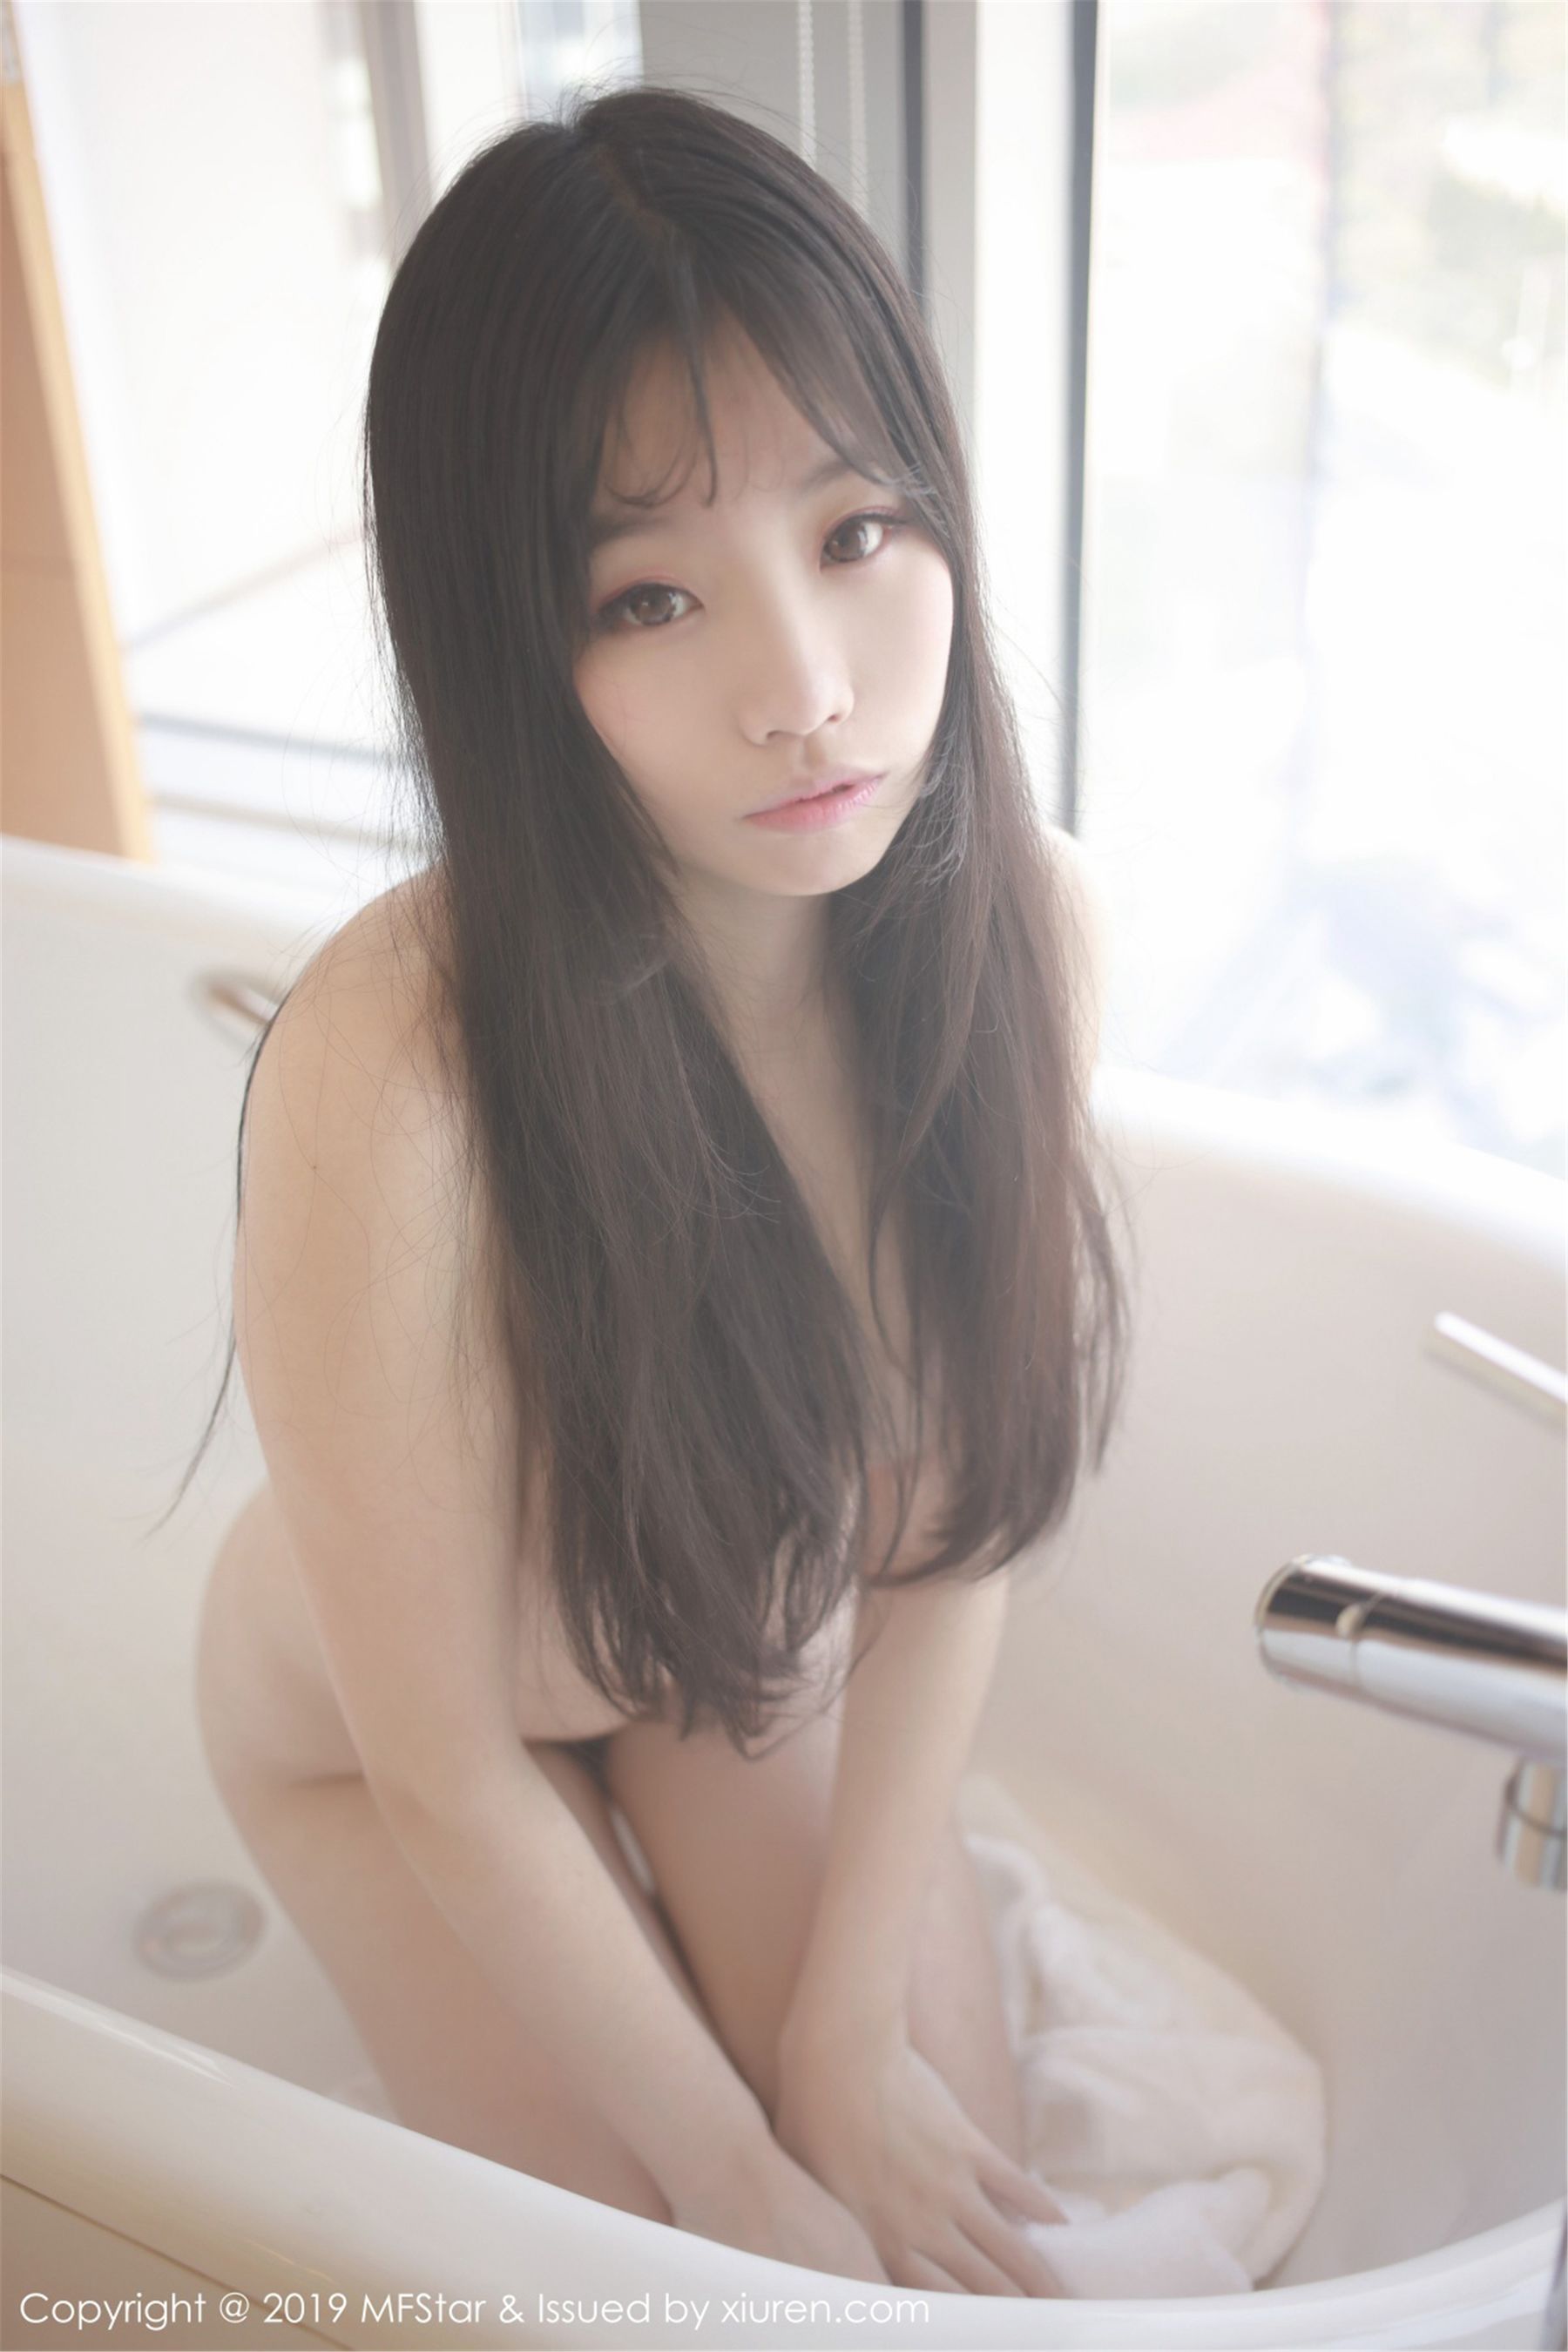 Strawberry Bunny "A Girl with Snowy White Skin under an Open Back Sweater" [Model Academy MFStar] Vol.189 Page 32 No.9b270b